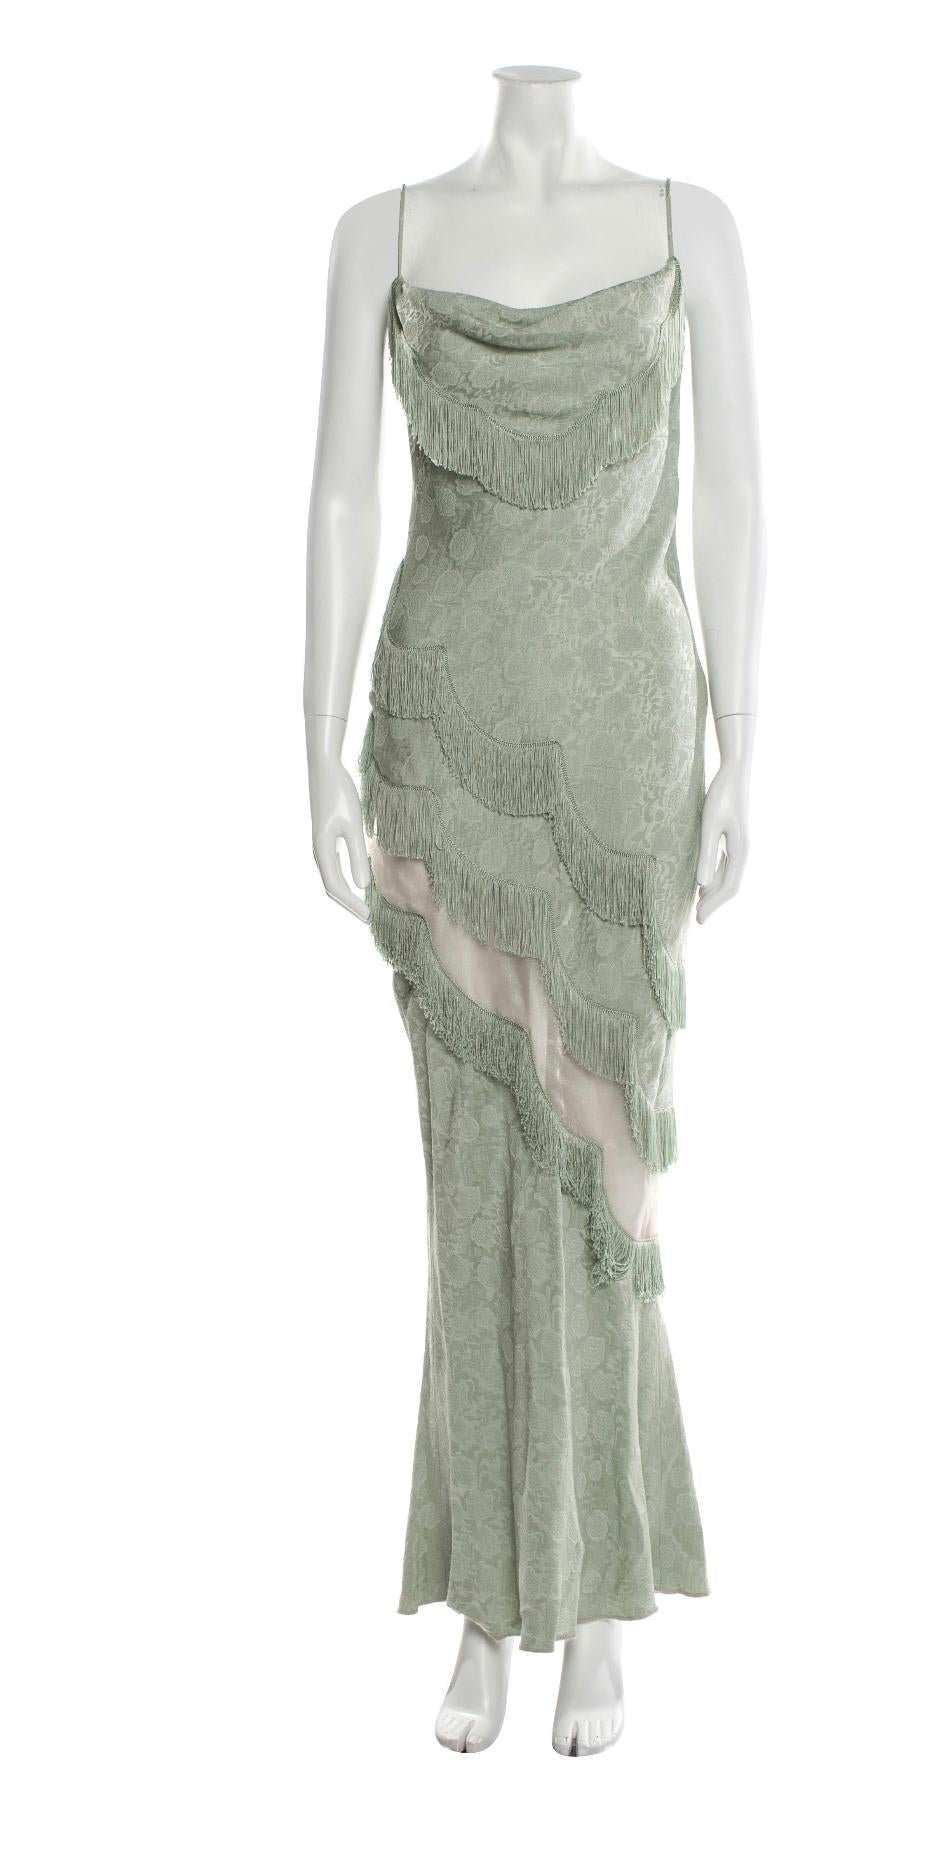 1998 Christian Dior green fringe gown with sheer panel

Condition: Excellent
size M/ US8 / FR40
34